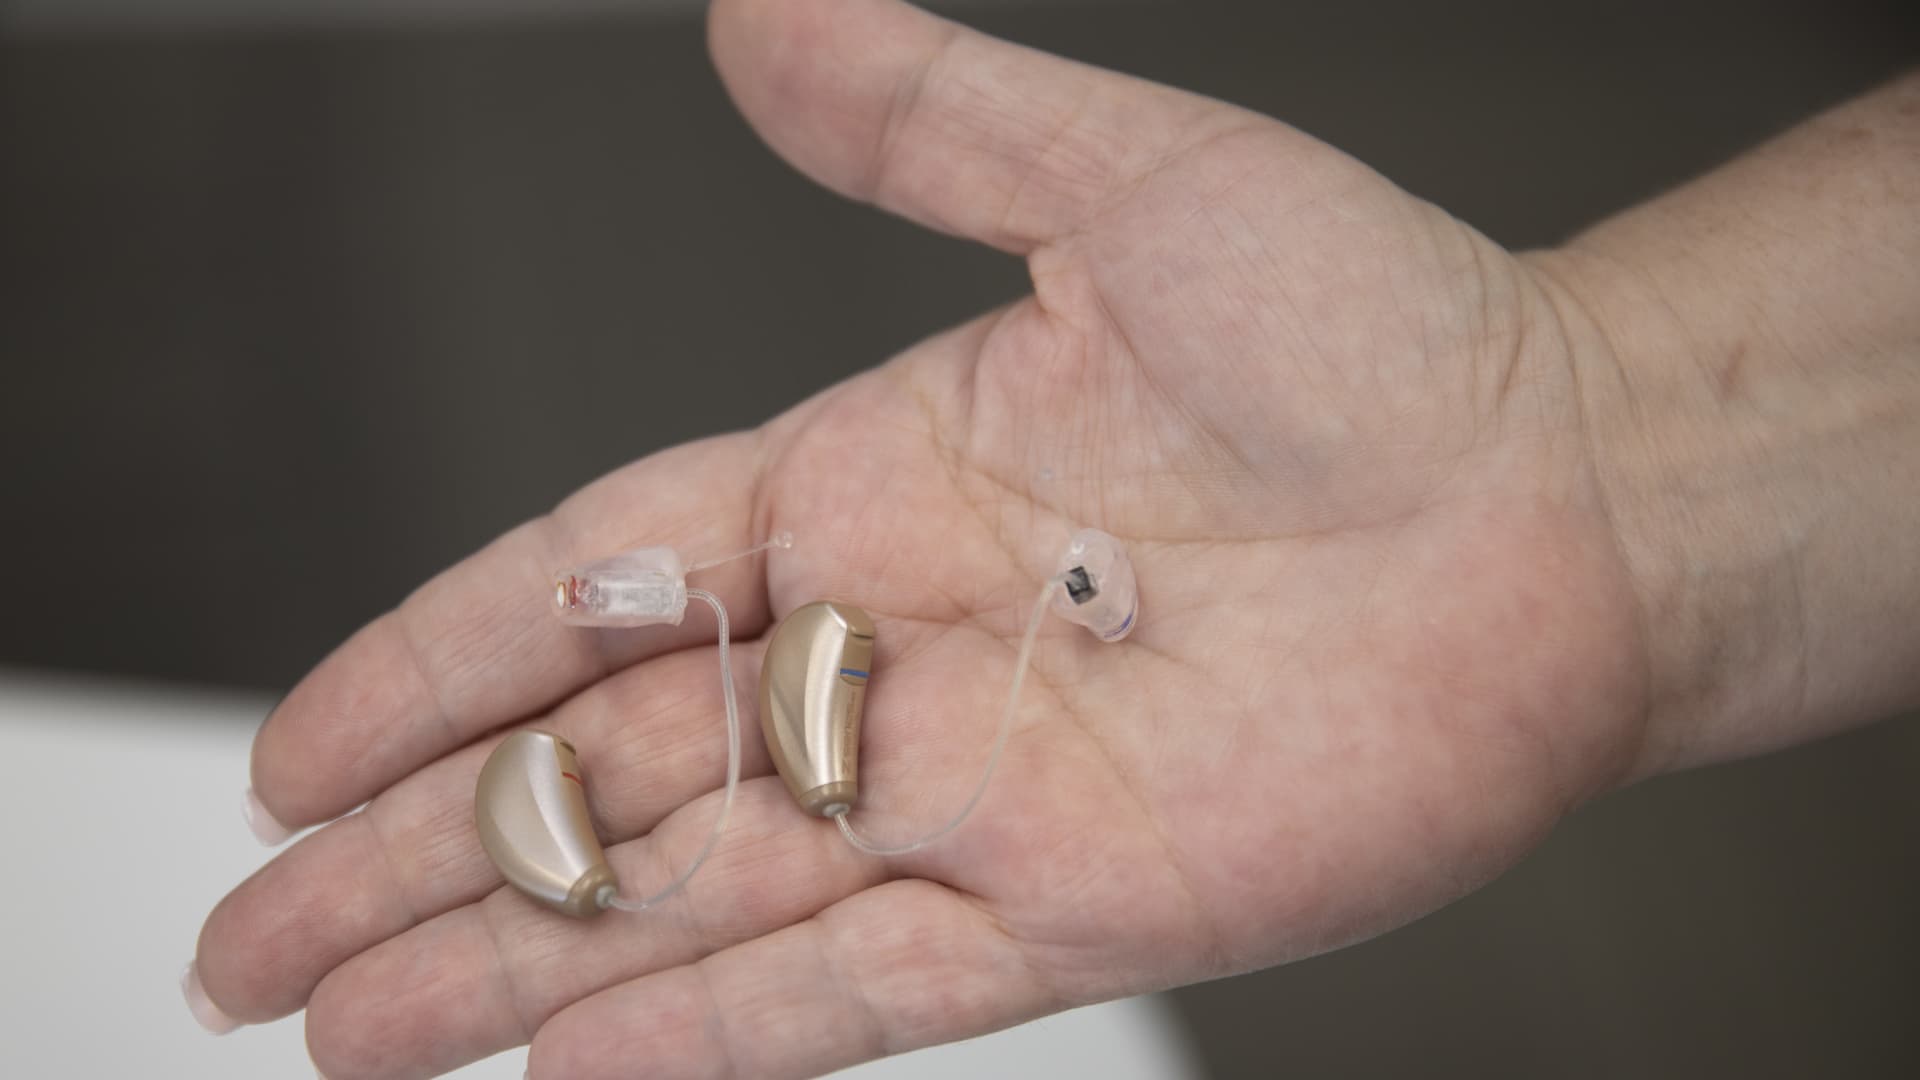 Hearing aids are now available over the counter at Walmart, Walgreens, CVS and Best Buy